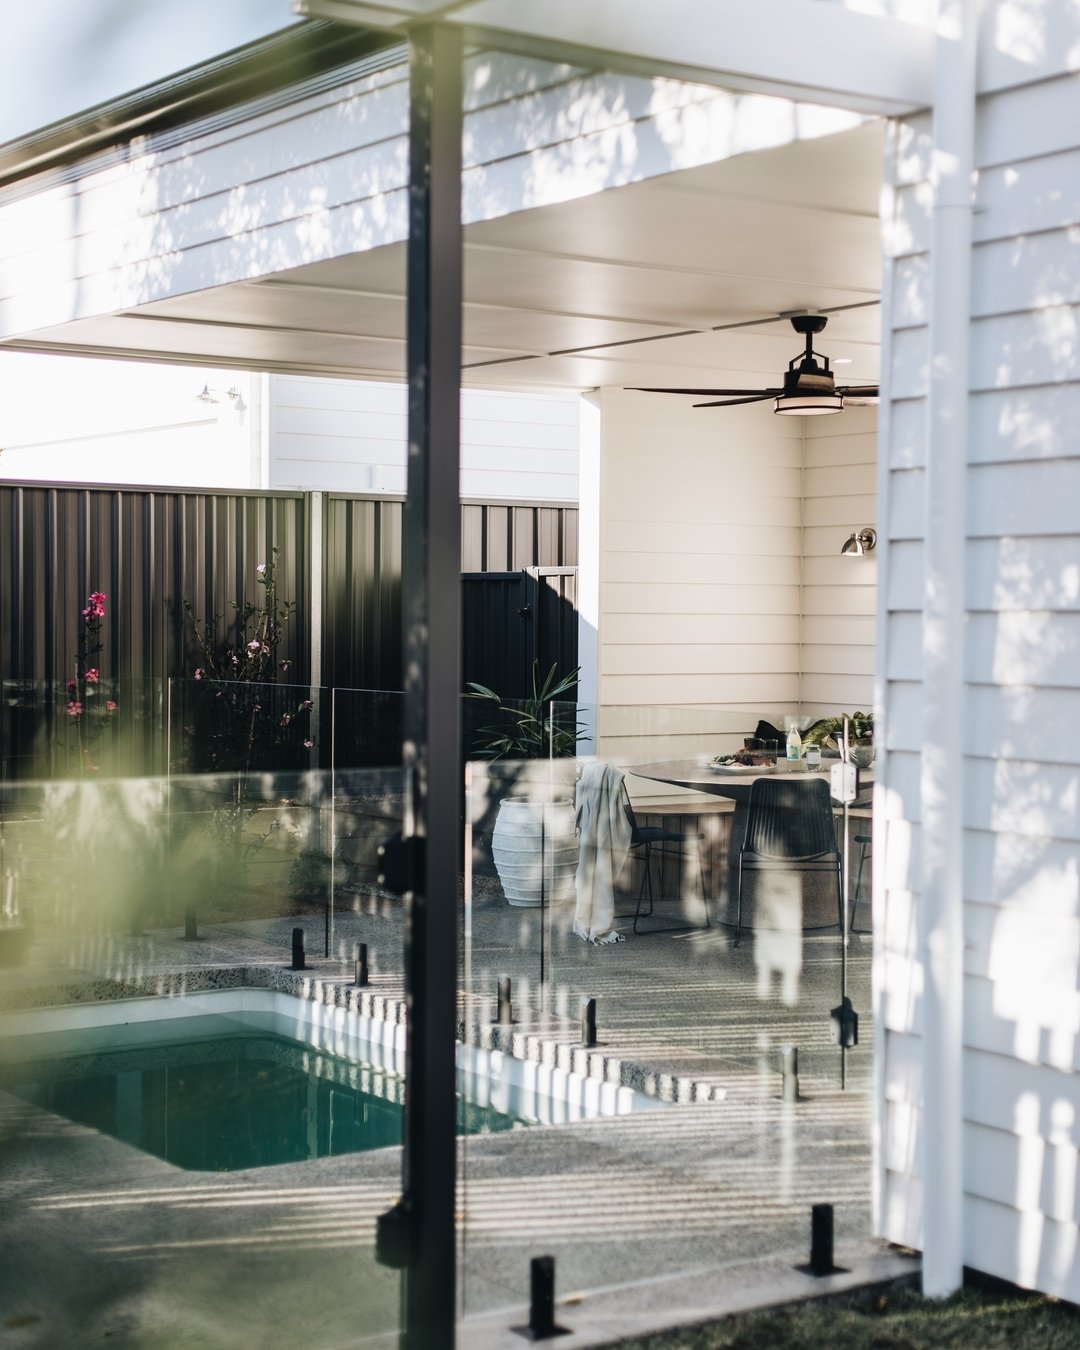 &ldquo;It is clear that the Linnaeus team approaches hospitality with the guest experience front of mind. An incredible, luxe &amp; thoughtfully designed property! Short stroll into Queen Street and Boongaree Rotary Nature Play Park (which is also AM